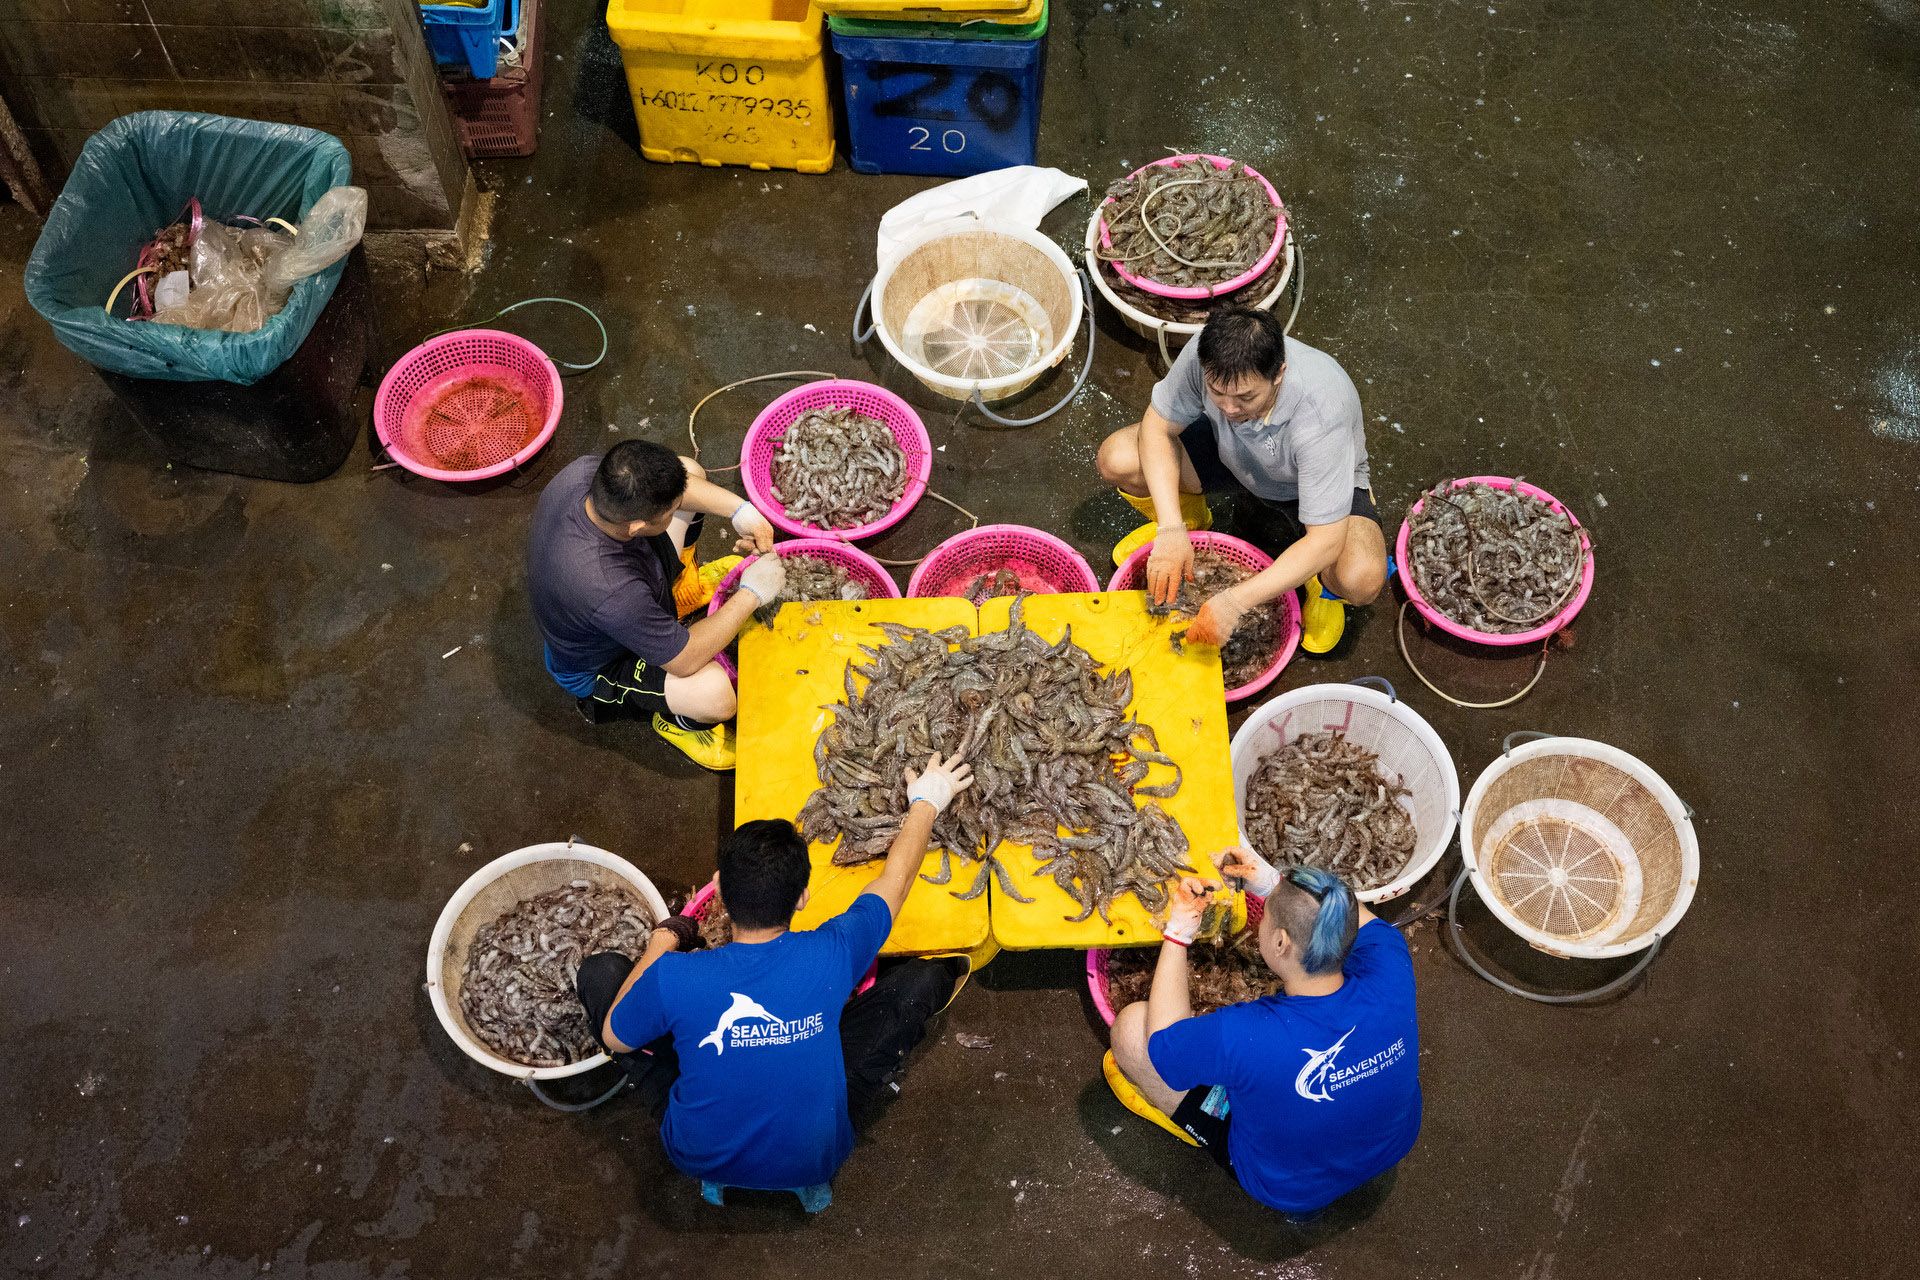 Workers sorting out prawns along the common area at Senoko Fishery Port.